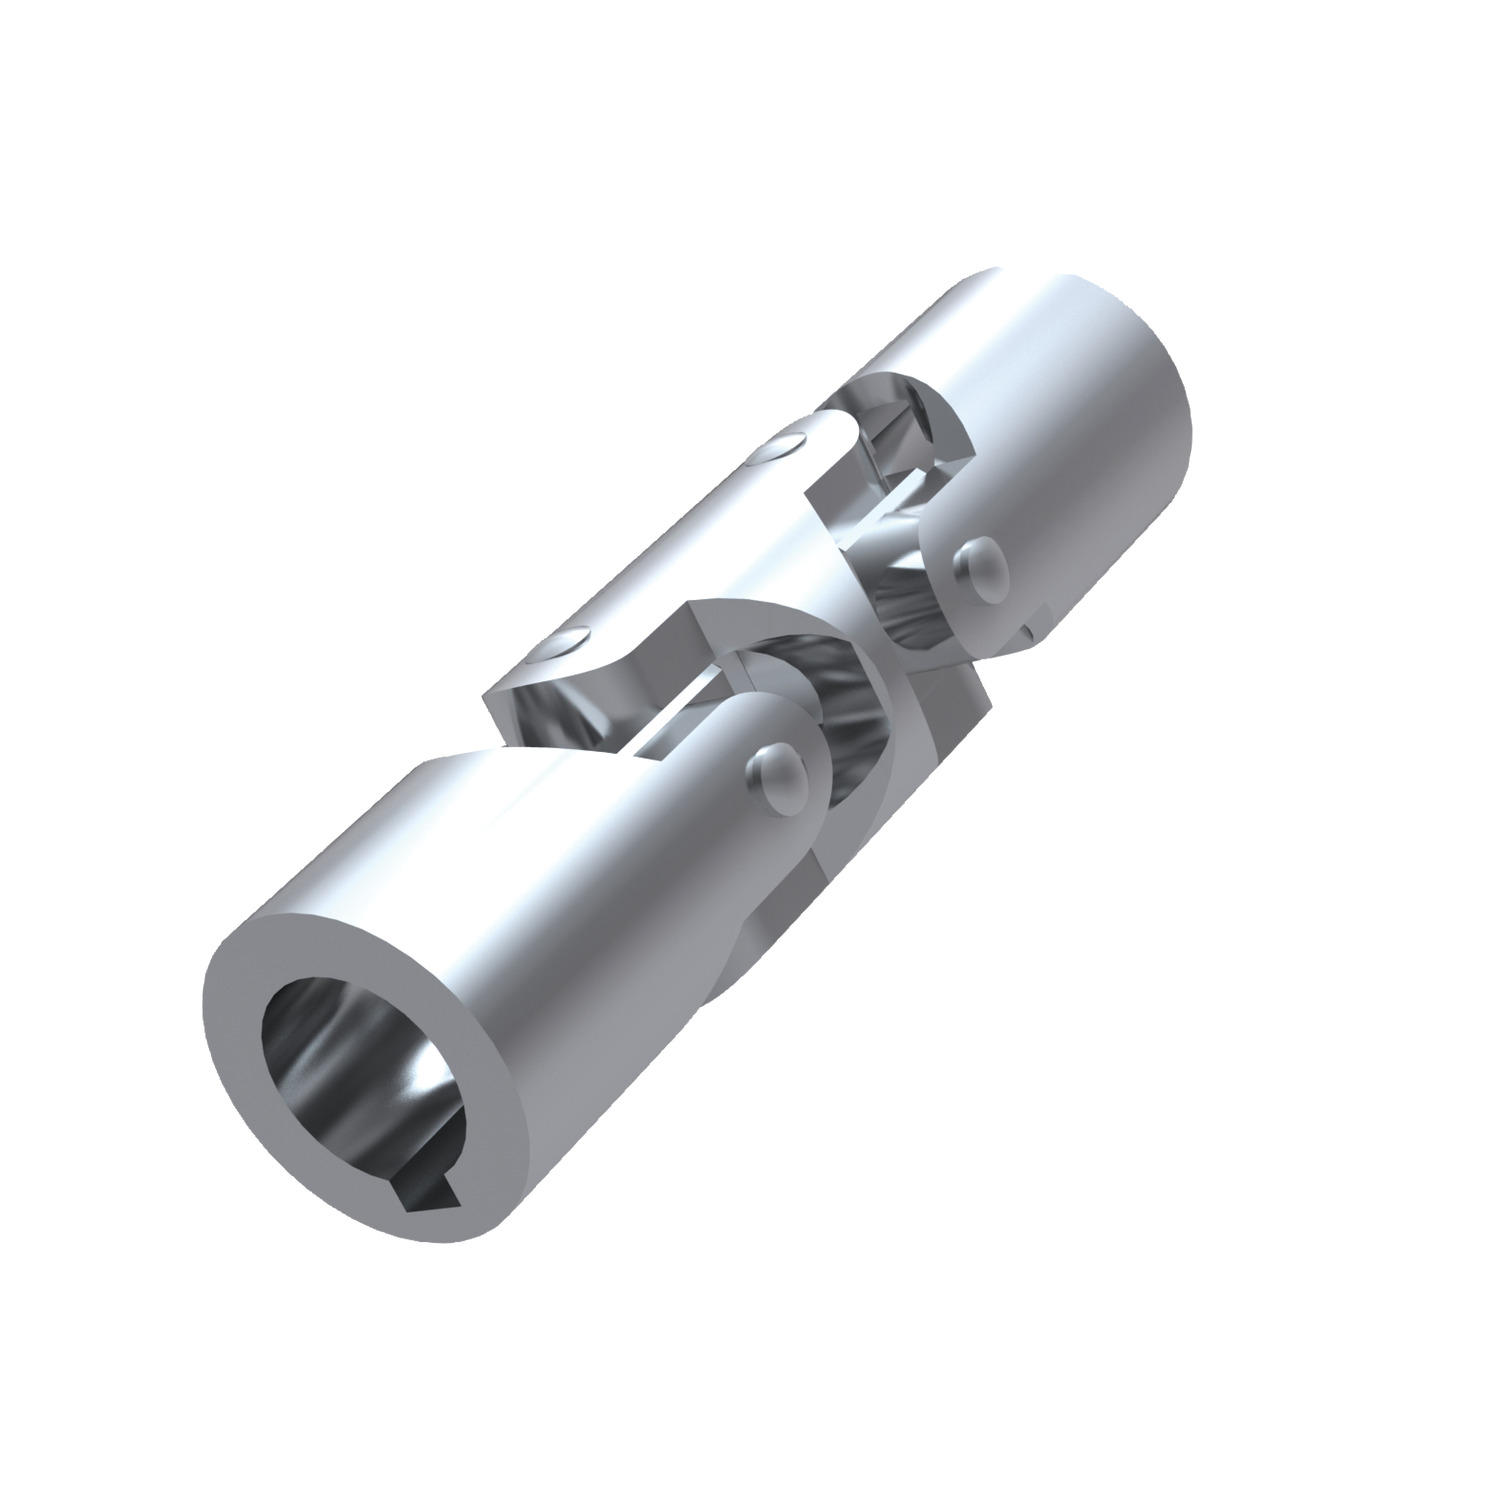 Double Universal Joint Free cutting steel universal joints, plain bearing (DIN 808 standard). Maximum bending angle of 45° per joint. Used where large bending angles are required.